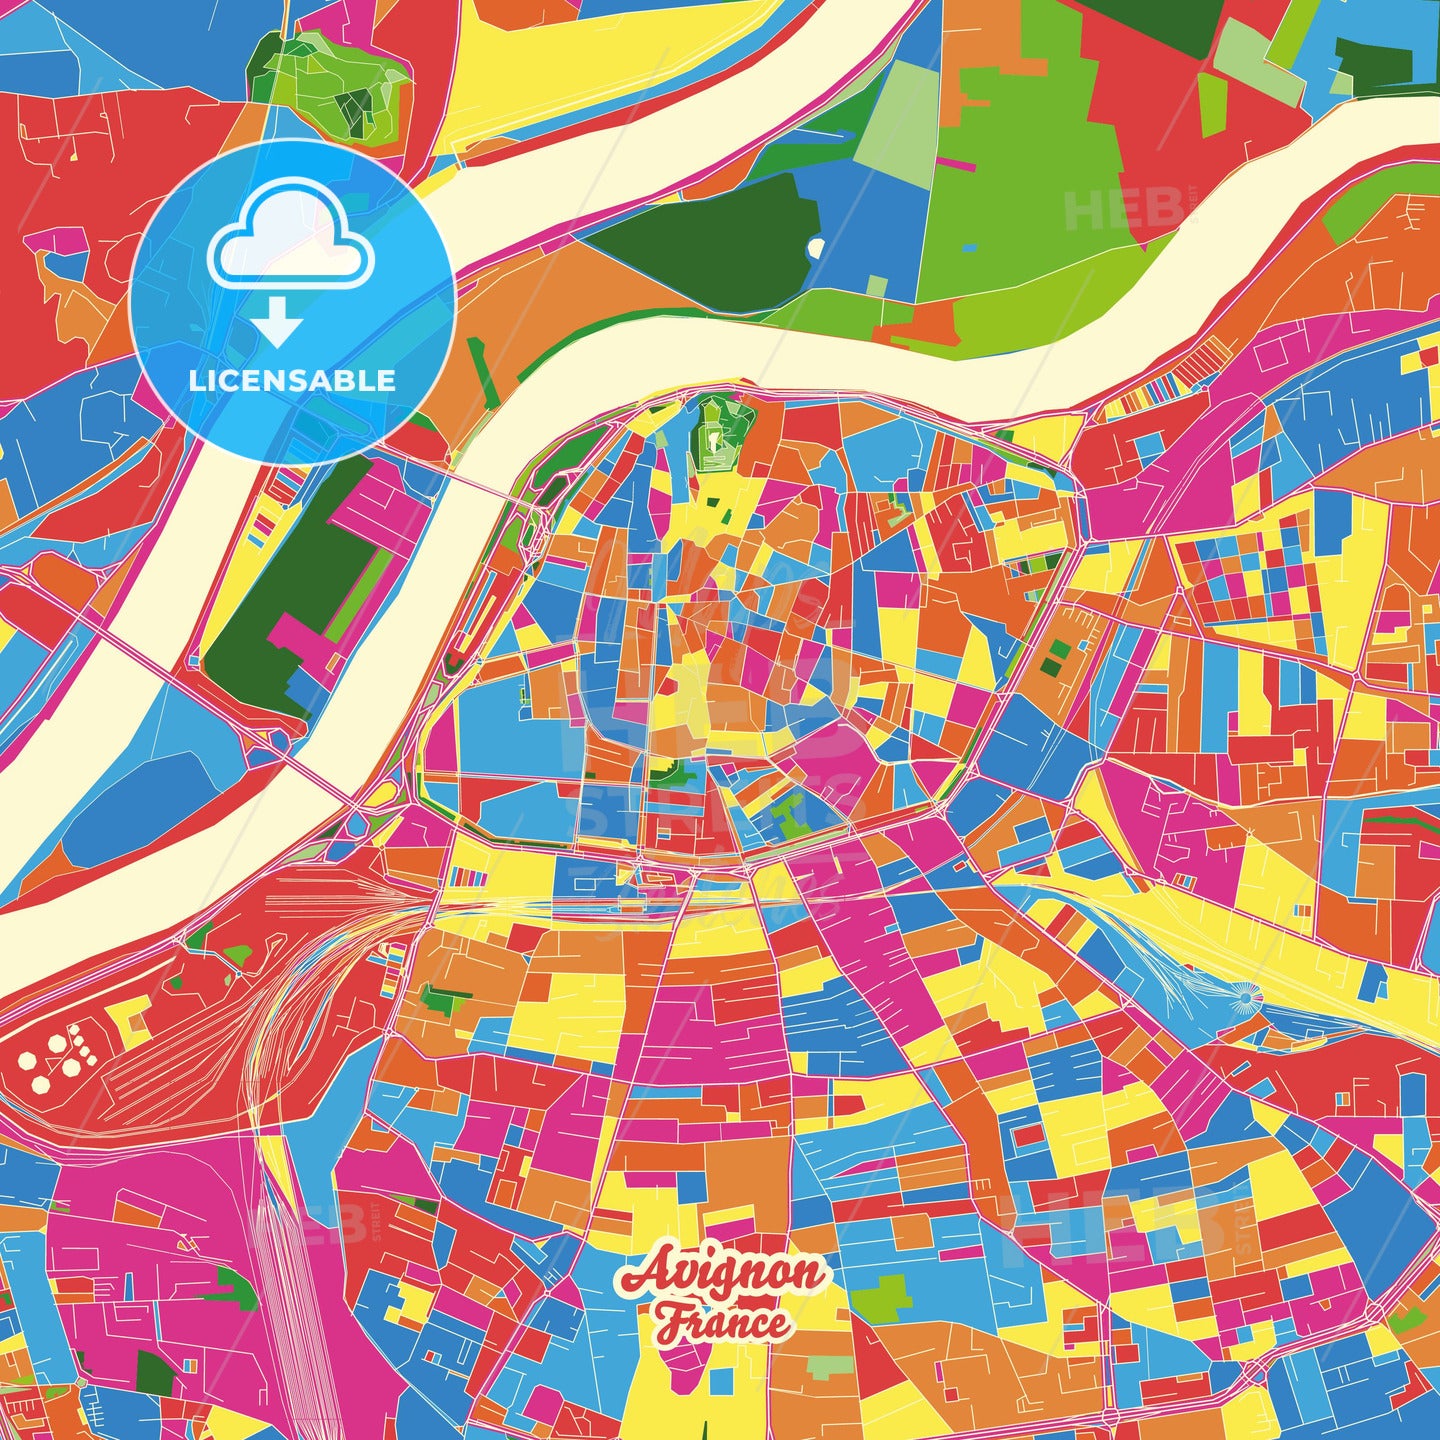 Avignon, France Crazy Colorful Street Map Poster Template - HEBSTREITS Sketches